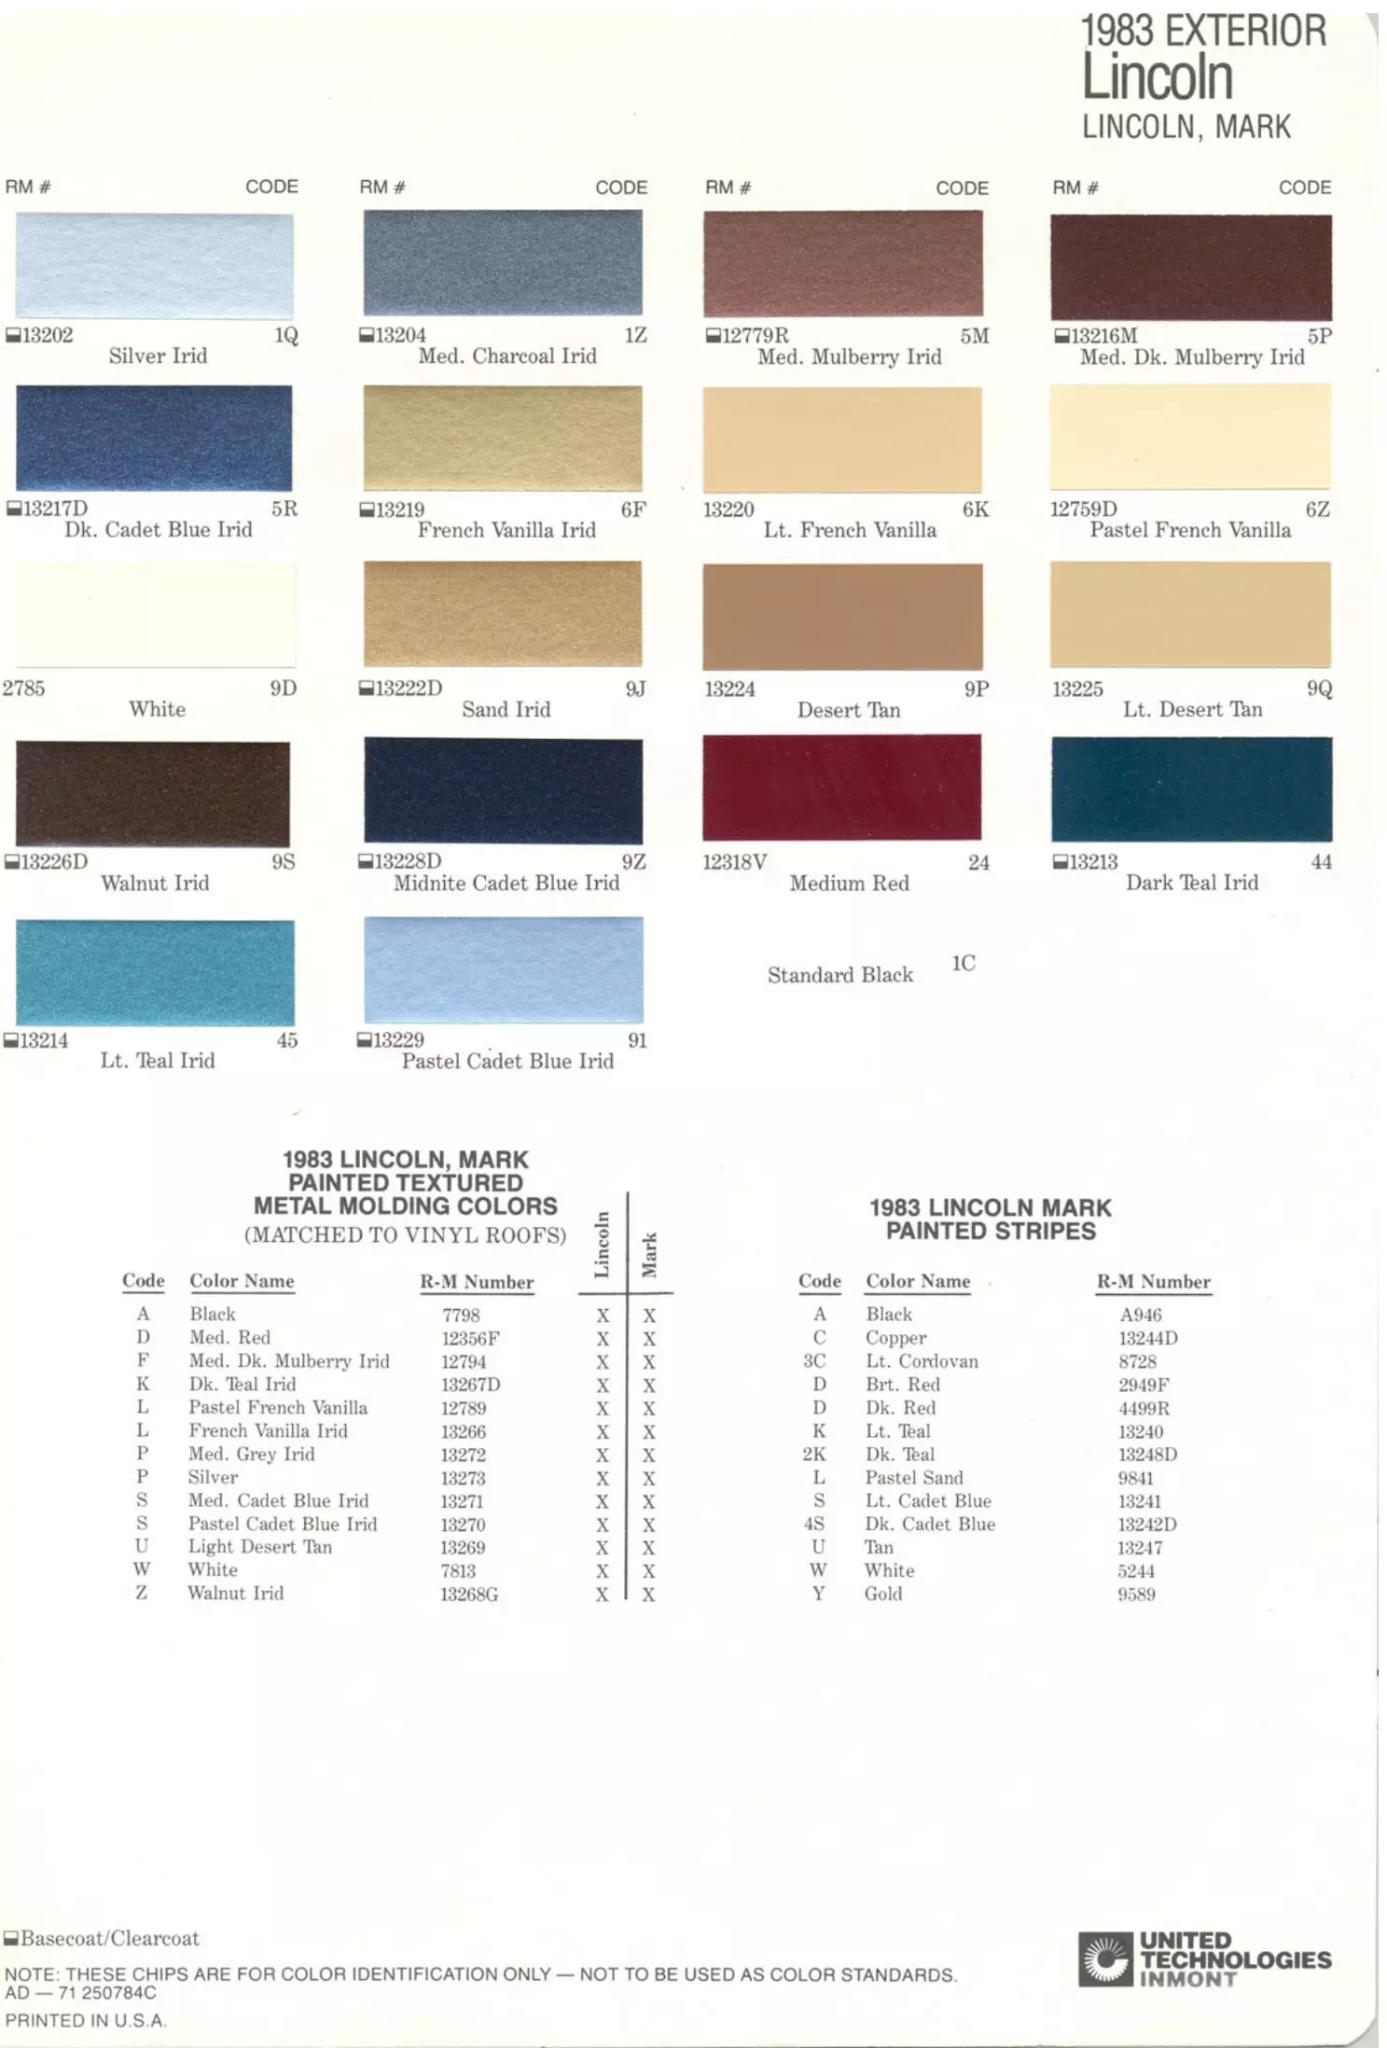 Colors, Codes and Examples used in 1983 on Lincoln Vehicles